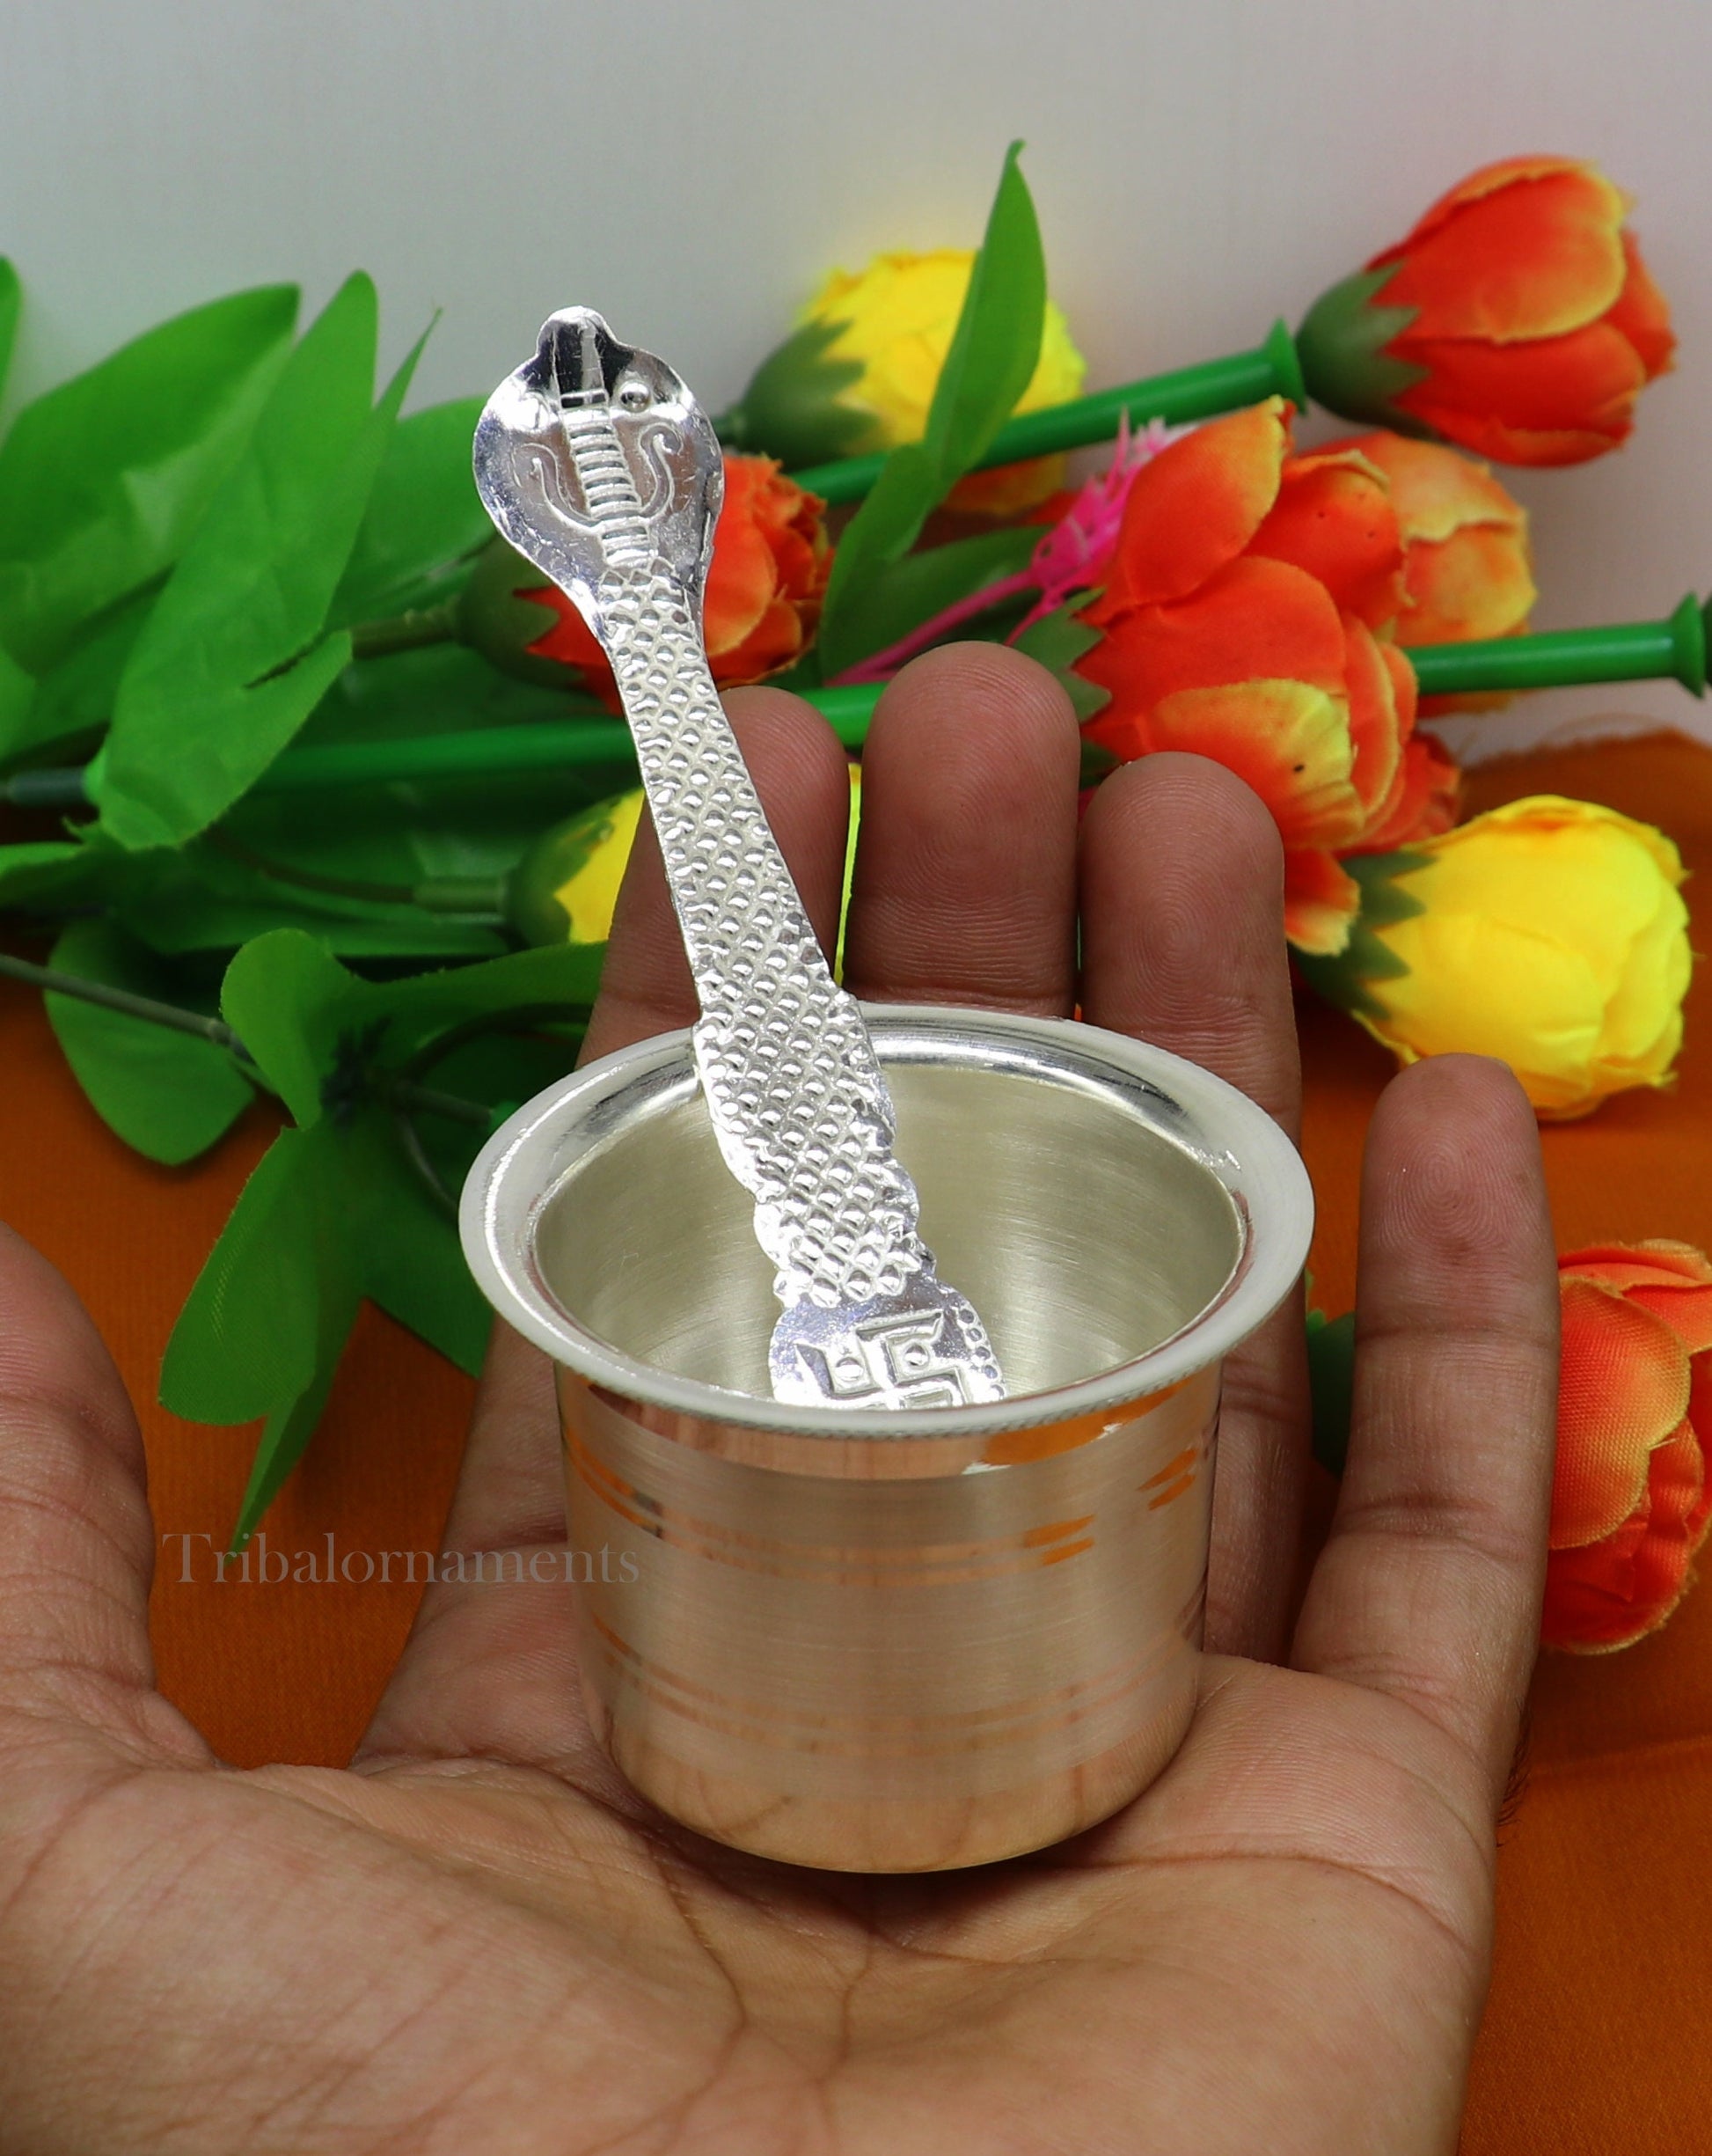 925 sterling silver handmade elegant Ghee pot patra puuja or worshipping, Butter pot for kitchen, silver puja utensils from India su539 - TRIBAL ORNAMENTS